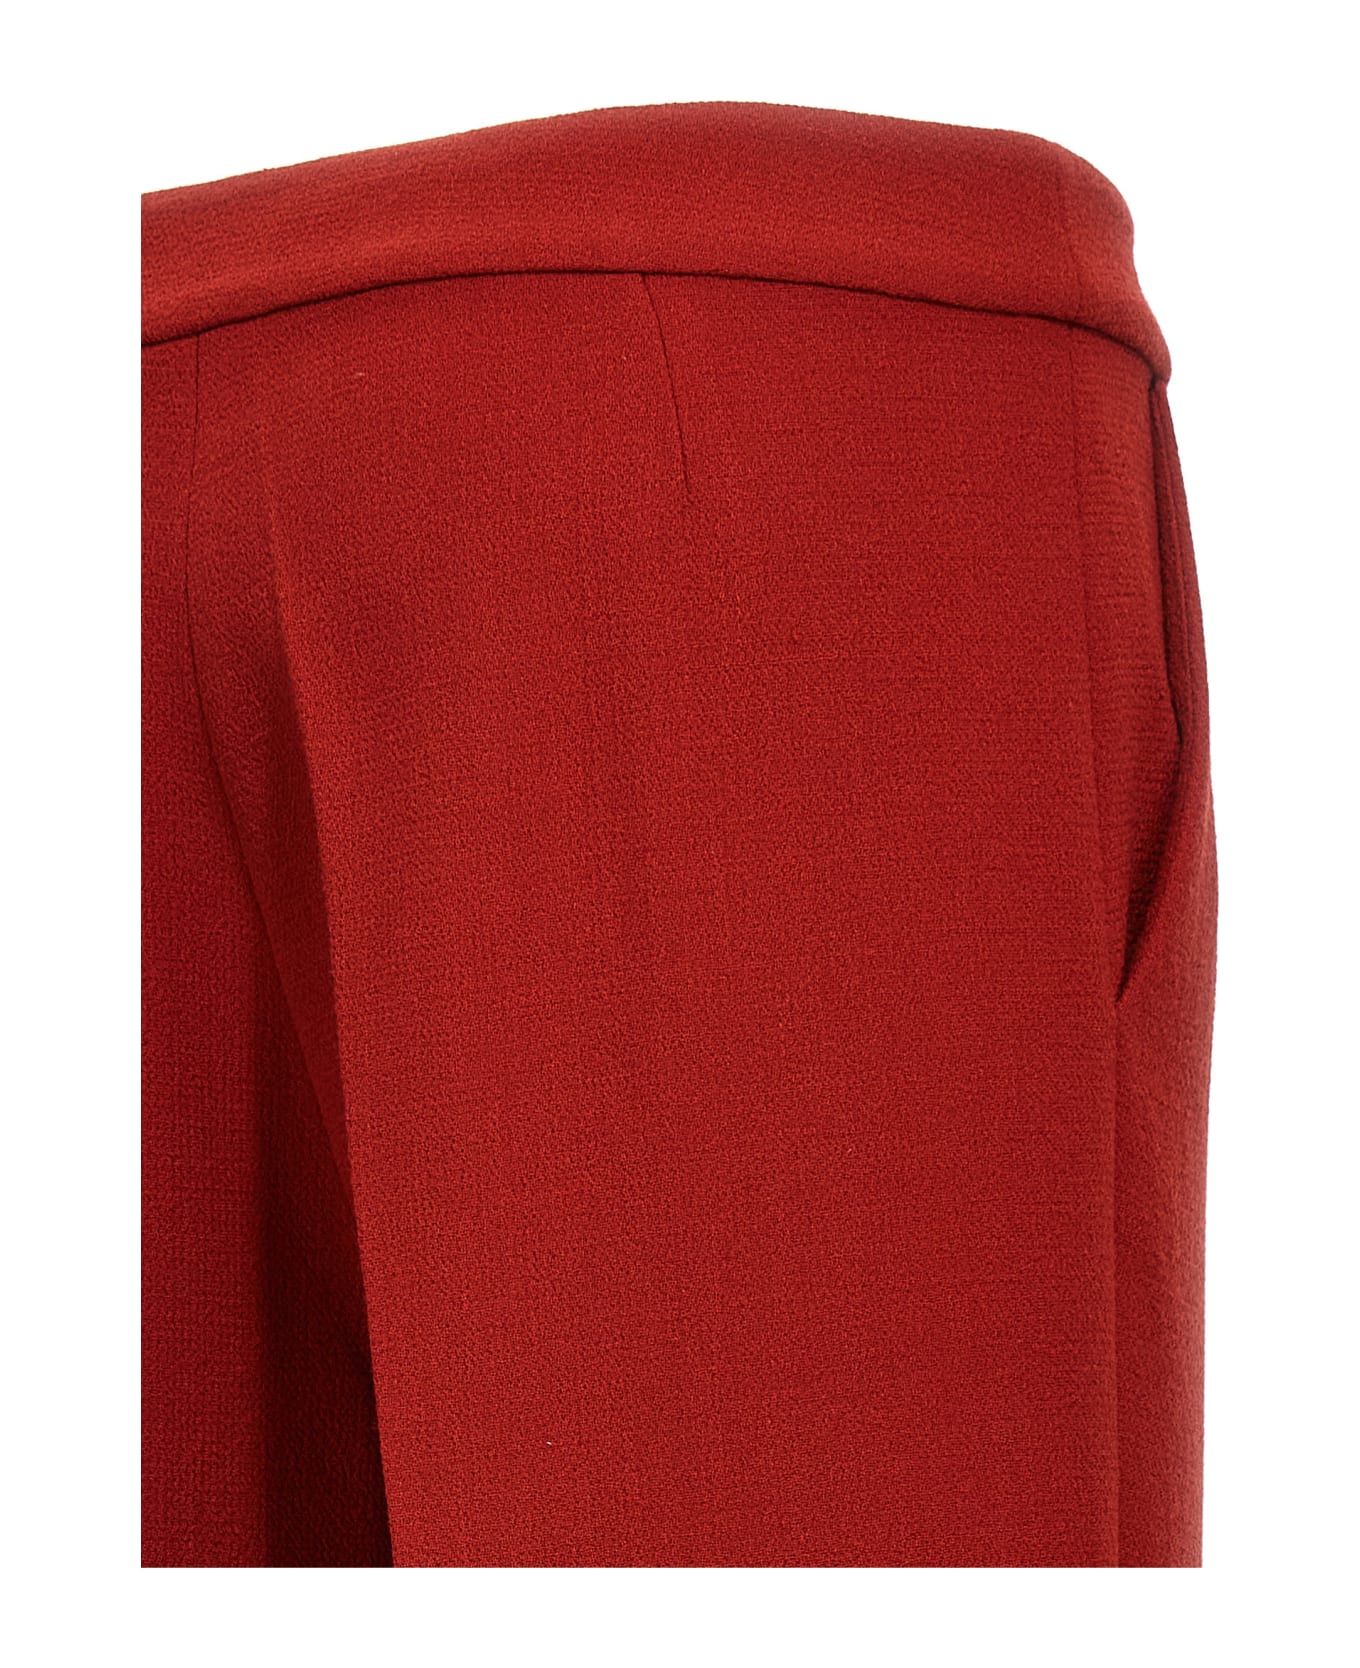 Gianluca Capannolo 'valerie' Pants - Red